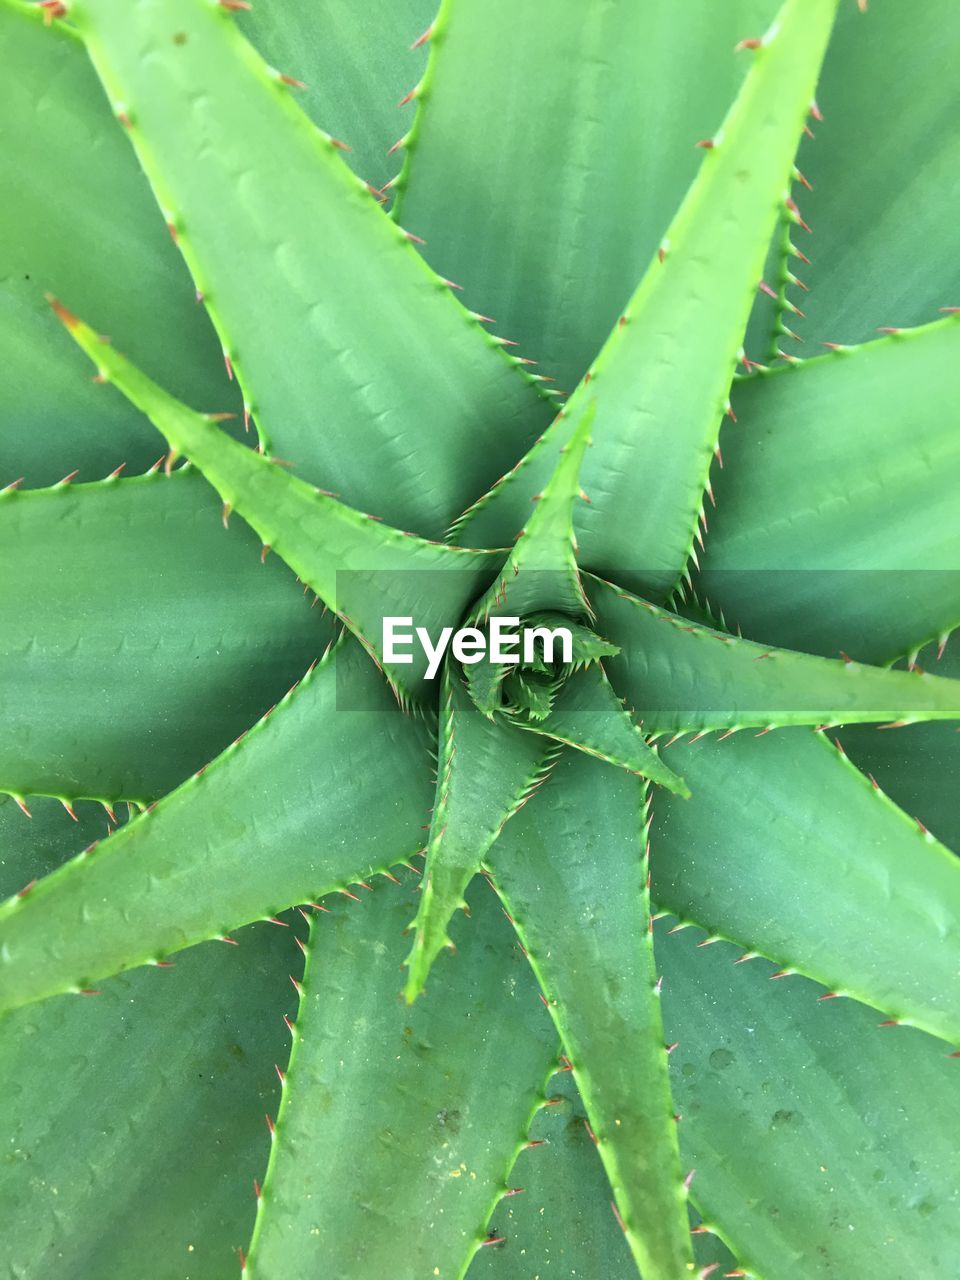 green, aloe, growth, plant, full frame, leaf, backgrounds, plant part, medicine, nature, beauty in nature, healthcare and medicine, no people, thorn, agave, succulent plant, alternative medicine, herbal medicine, close-up, xanthorrhoeaceae, pattern, flower, aloe vera plant, cactus, botany, outdoors, spiked, plant stem, environment, day